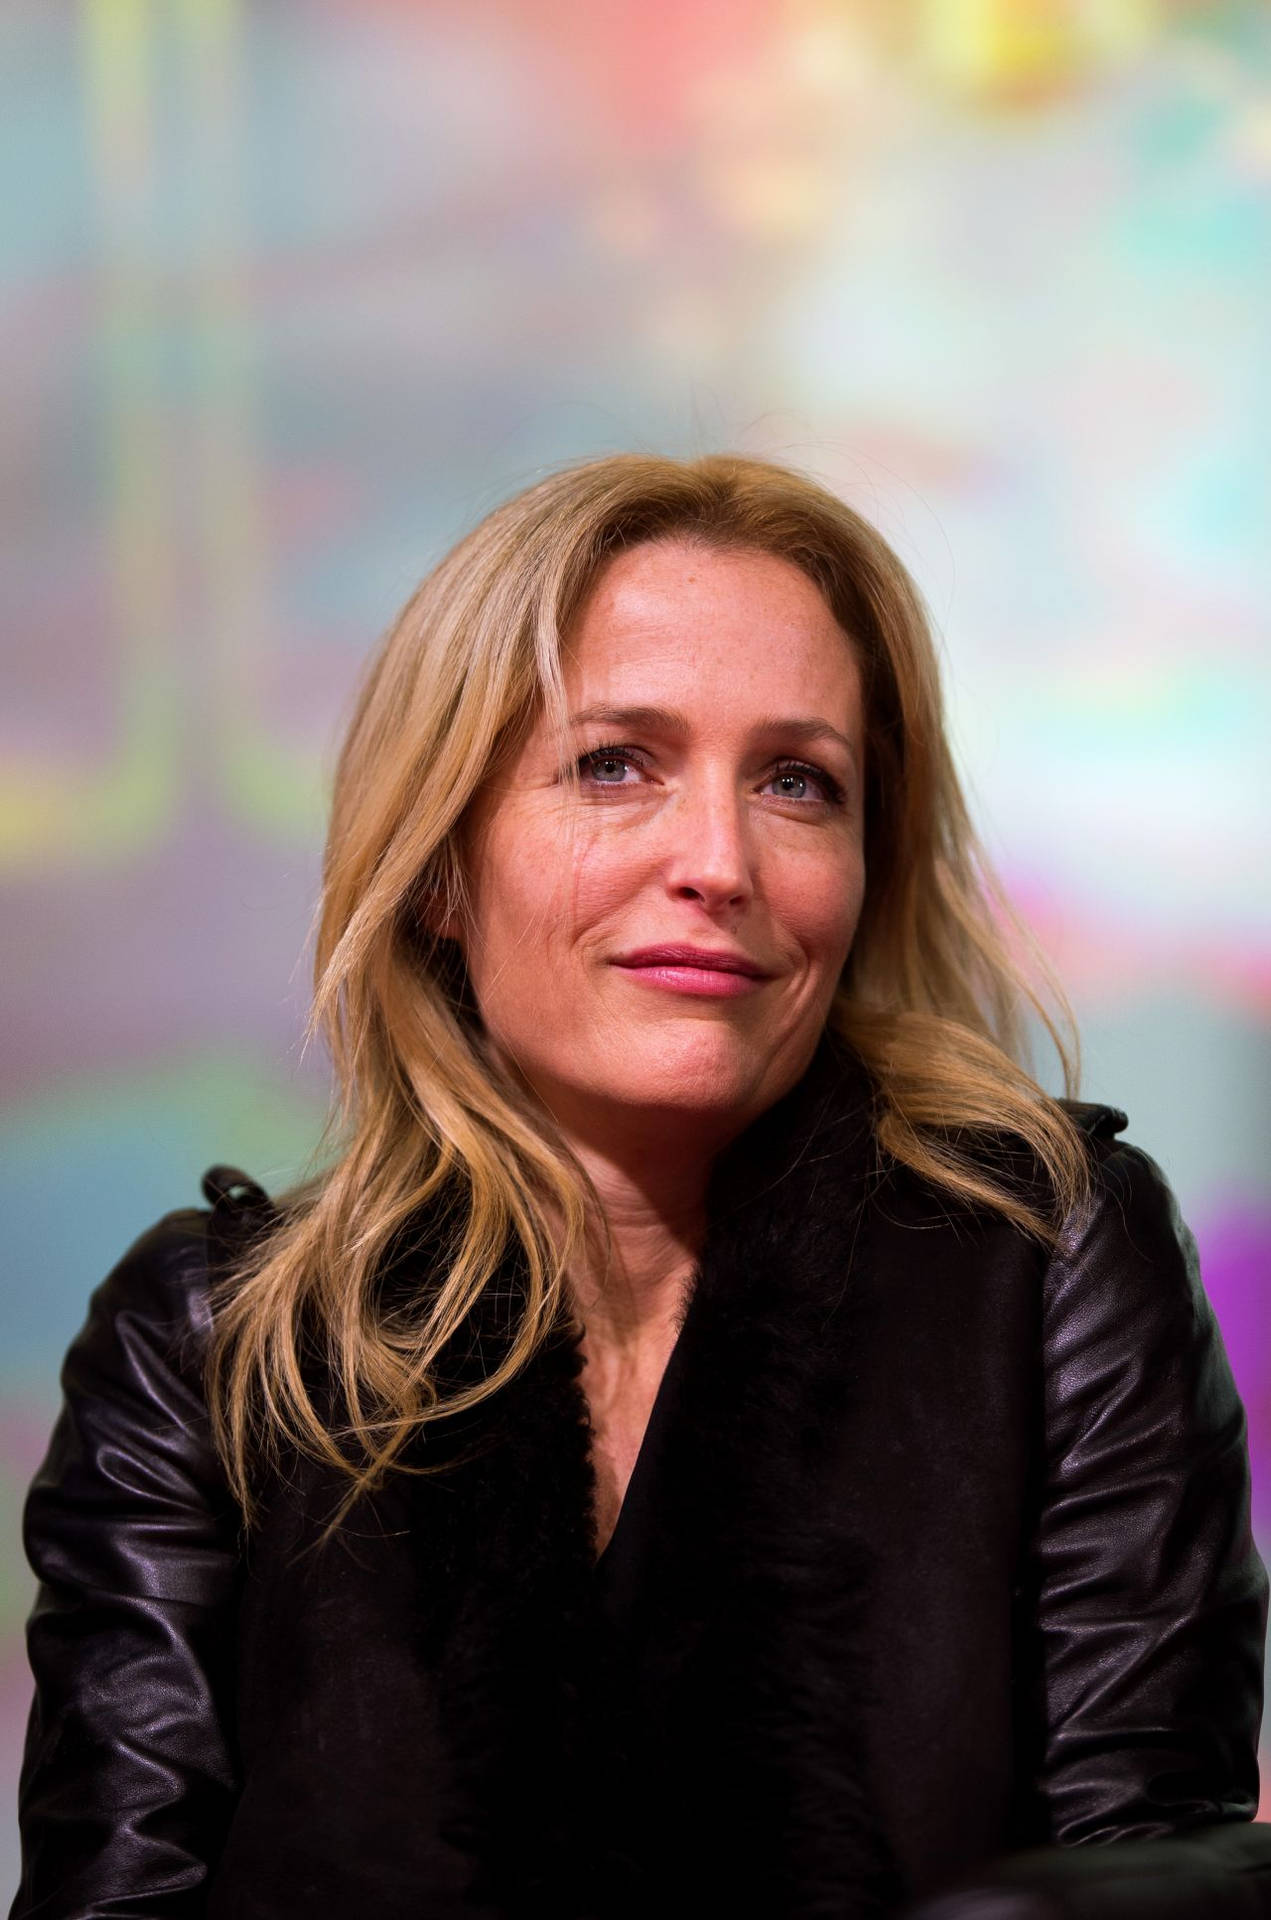 Gillian Anderson During An X-files Meet And Greet Background